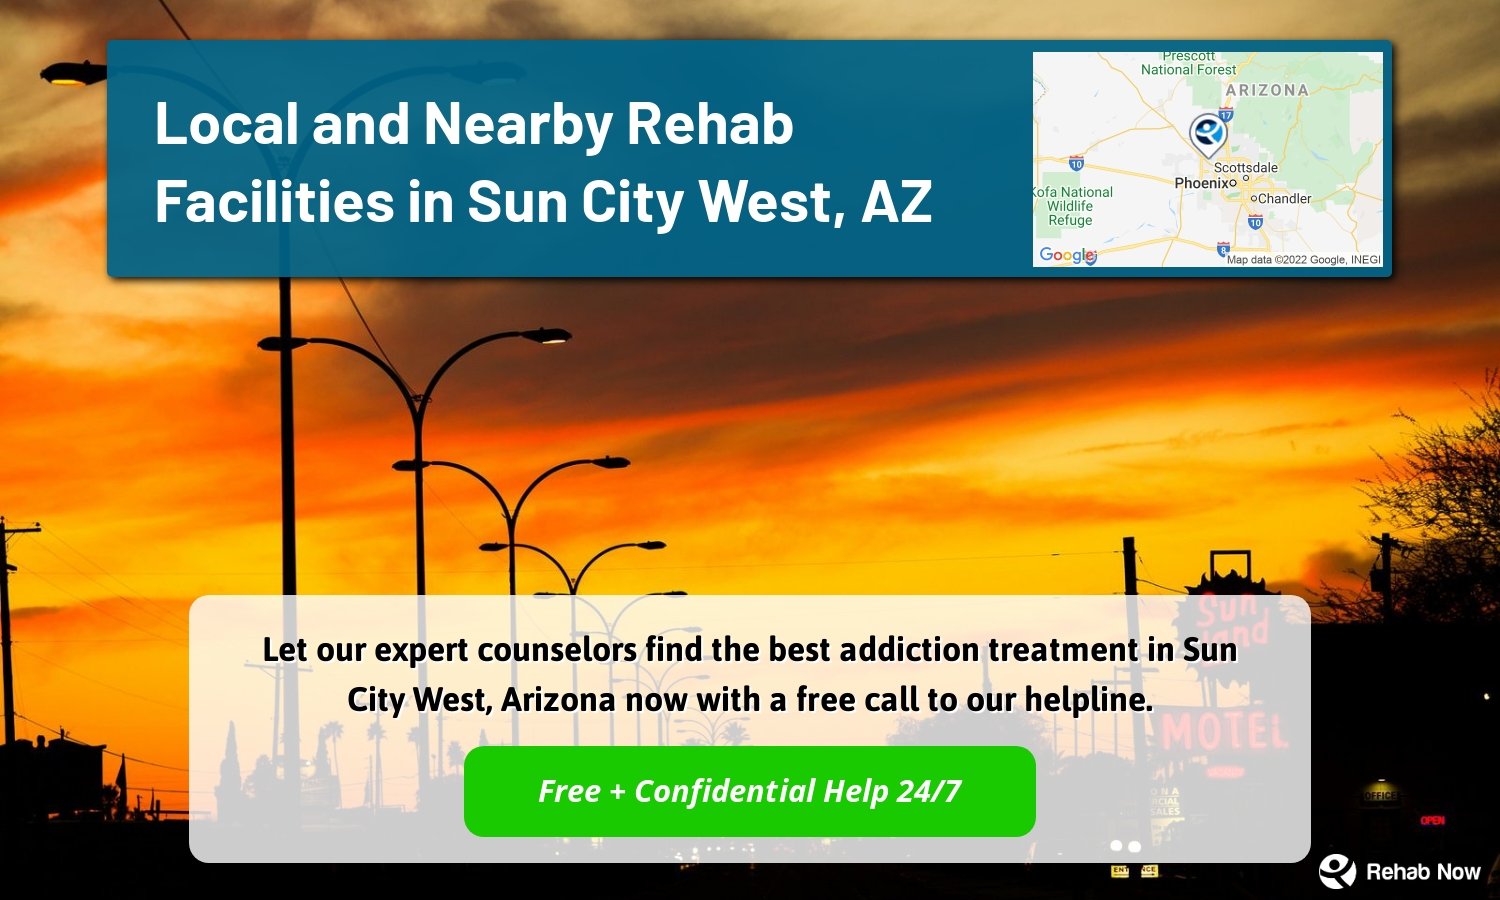 Let our expert counselors find the best addiction treatment in Sun City West, Arizona now with a free call to our helpline.